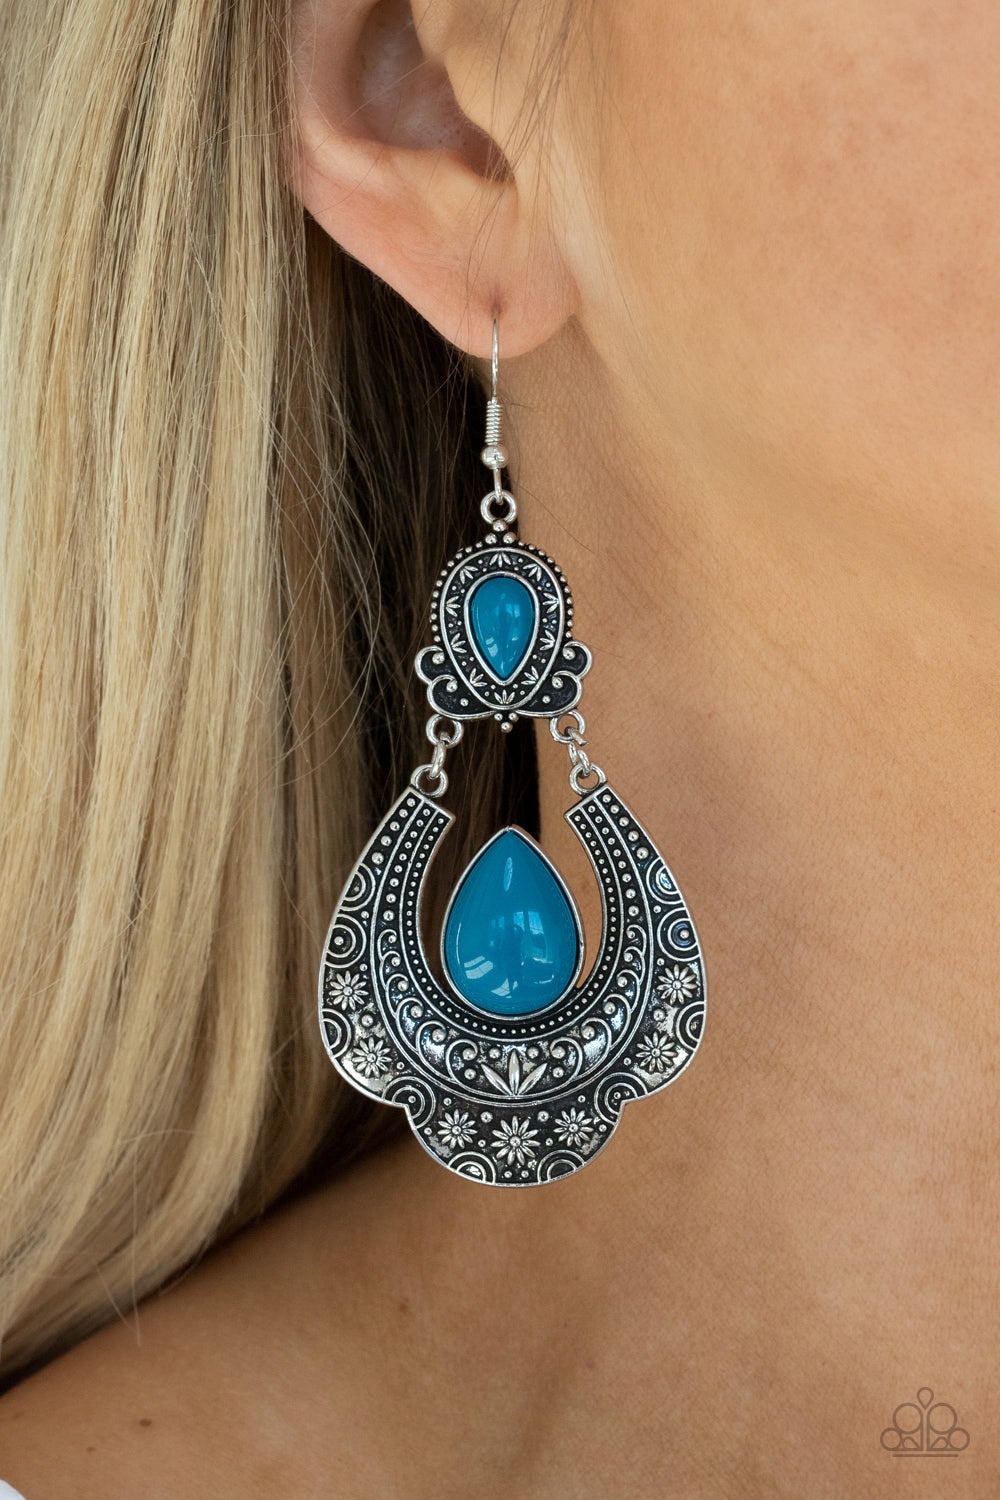 &lt;p&gt;Dotted with blue teardrop beads, two mismatched silver frames with studded and embossed floral inspired textures delicately link into a colorful lure. Earring attaches to a standard fishhook fitting.&lt;/p&gt;  

&lt;p&gt; &lt;i&gt;  Sold as one pair of earrings. &lt;/i&gt;  &lt;/p&gt;


